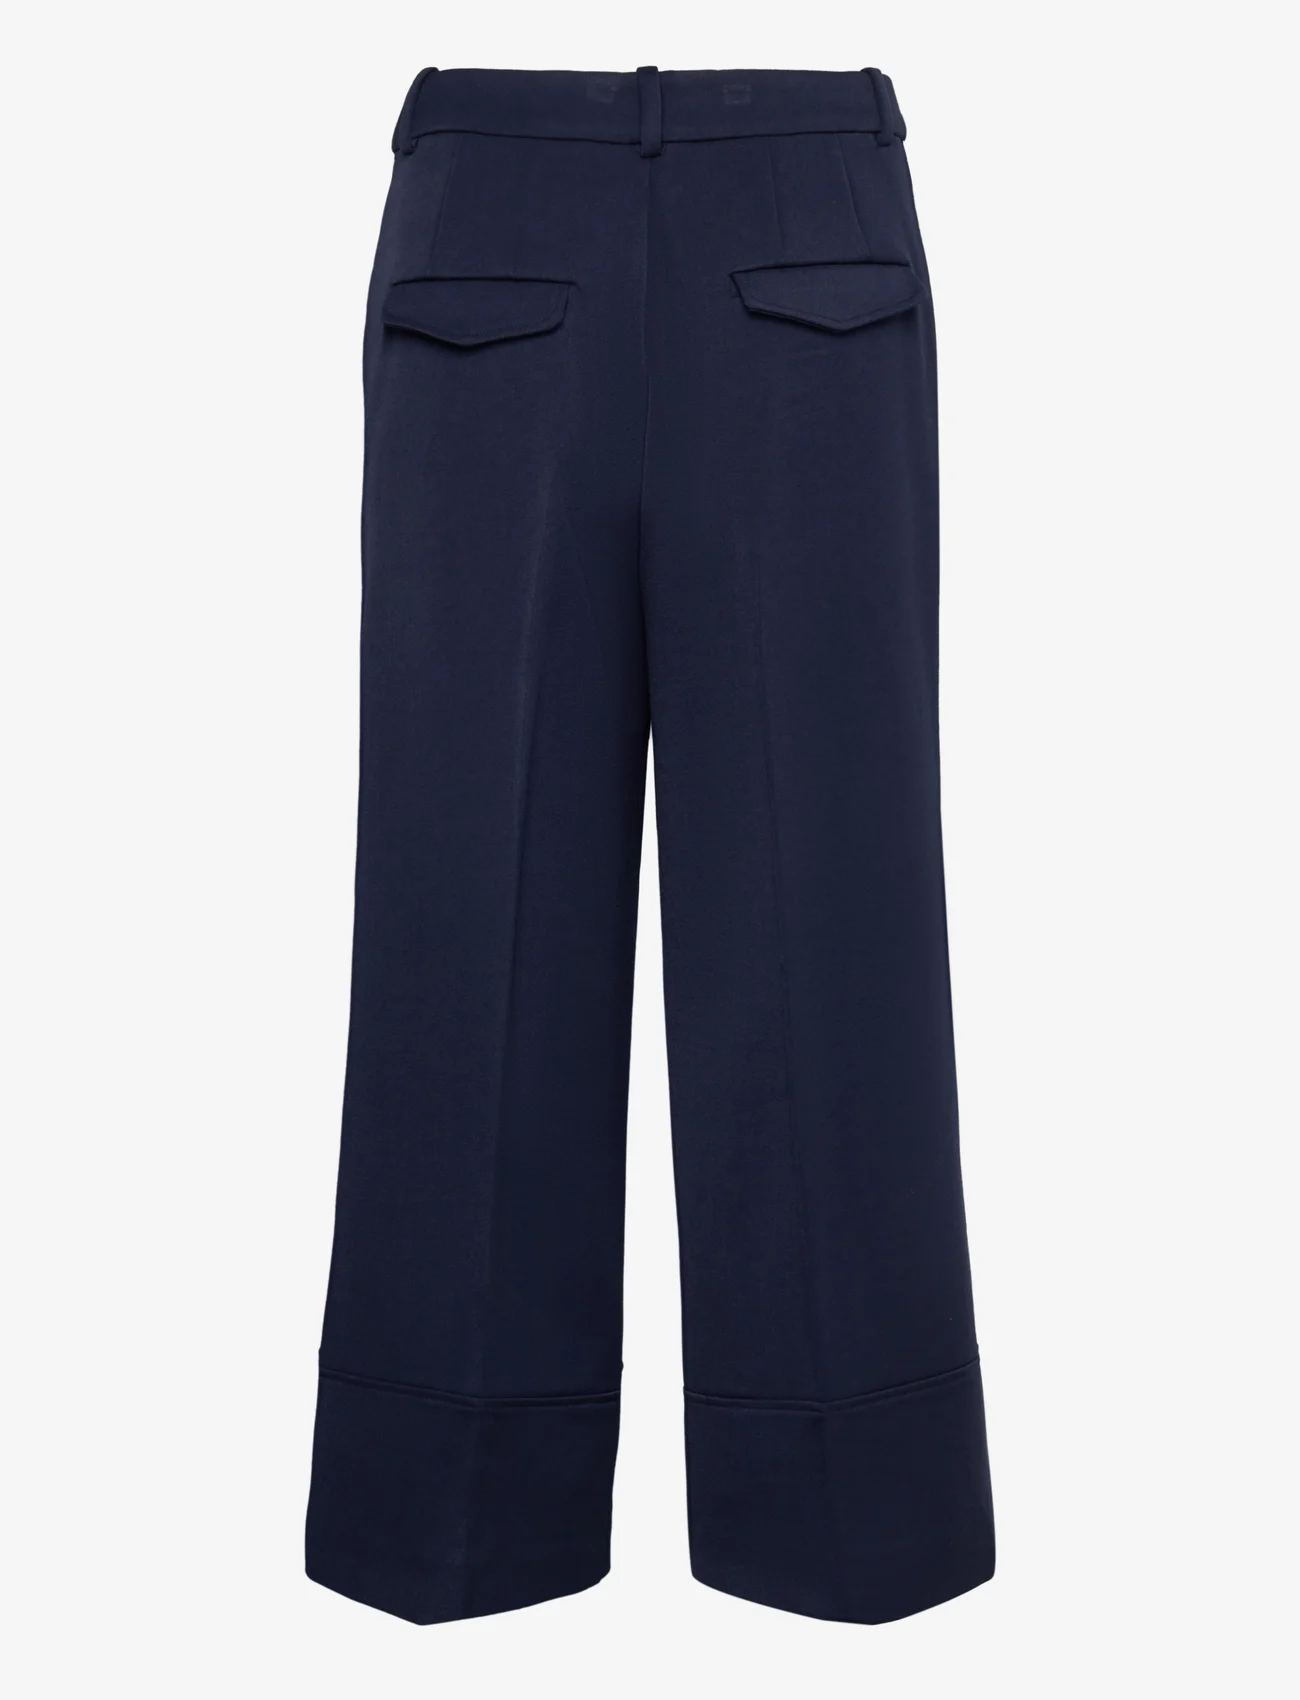 Esprit Casual - Culotte trousers with blended viscose - straight leg trousers - navy - 1